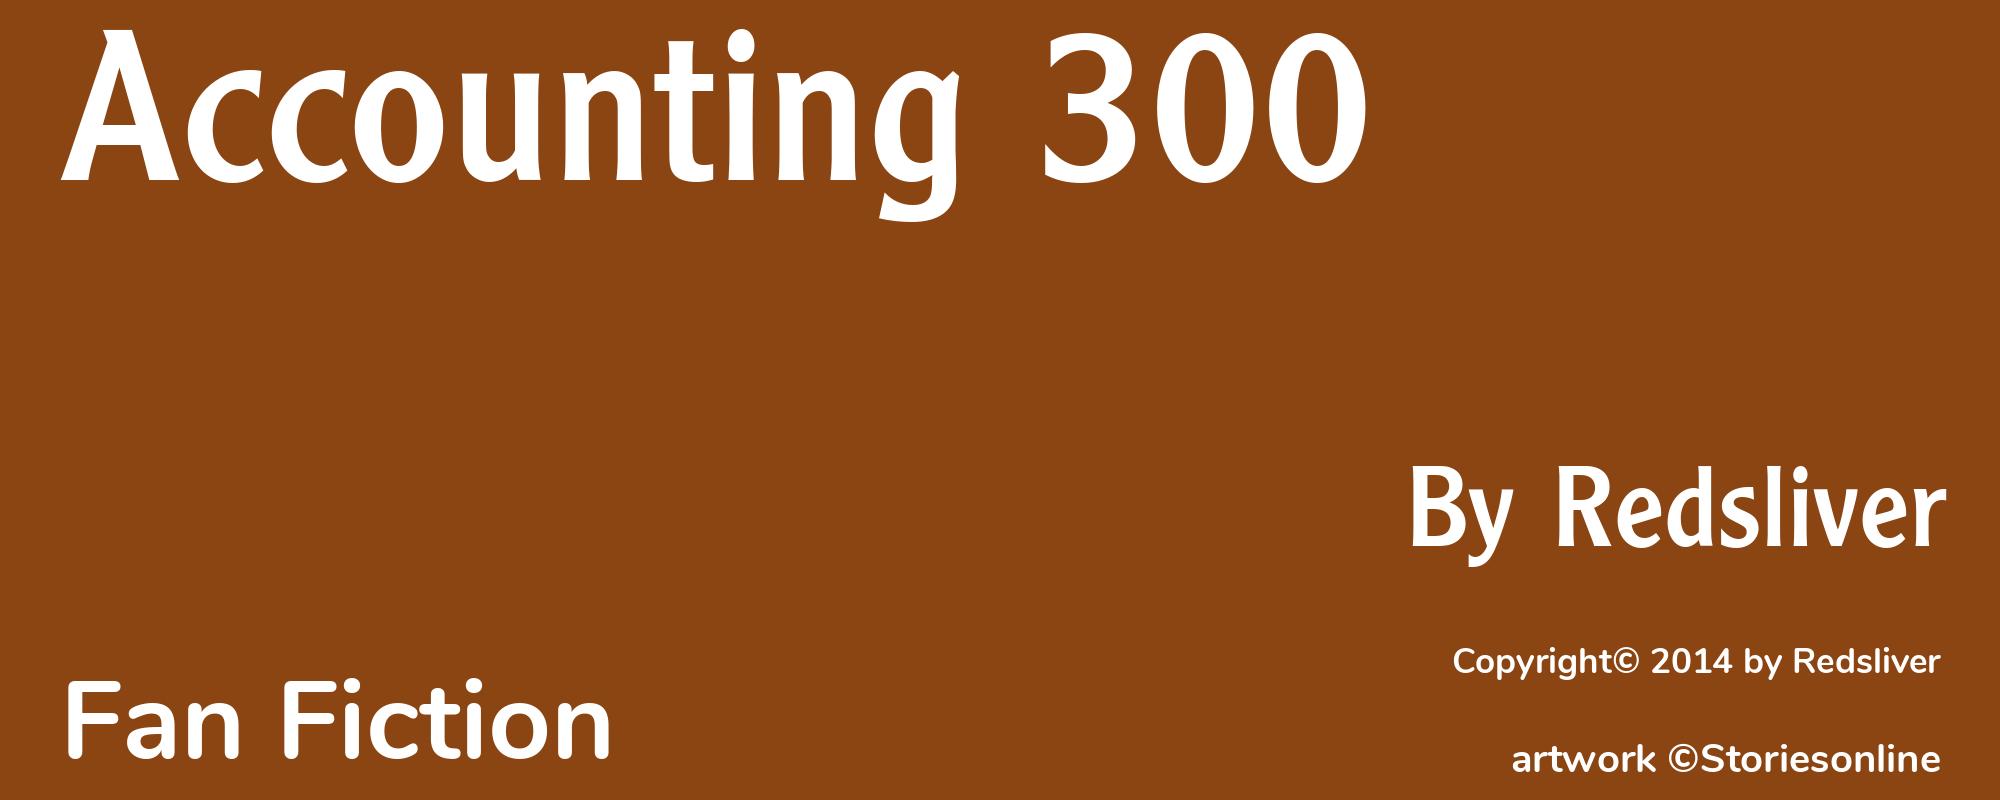 Accounting 300 - Cover